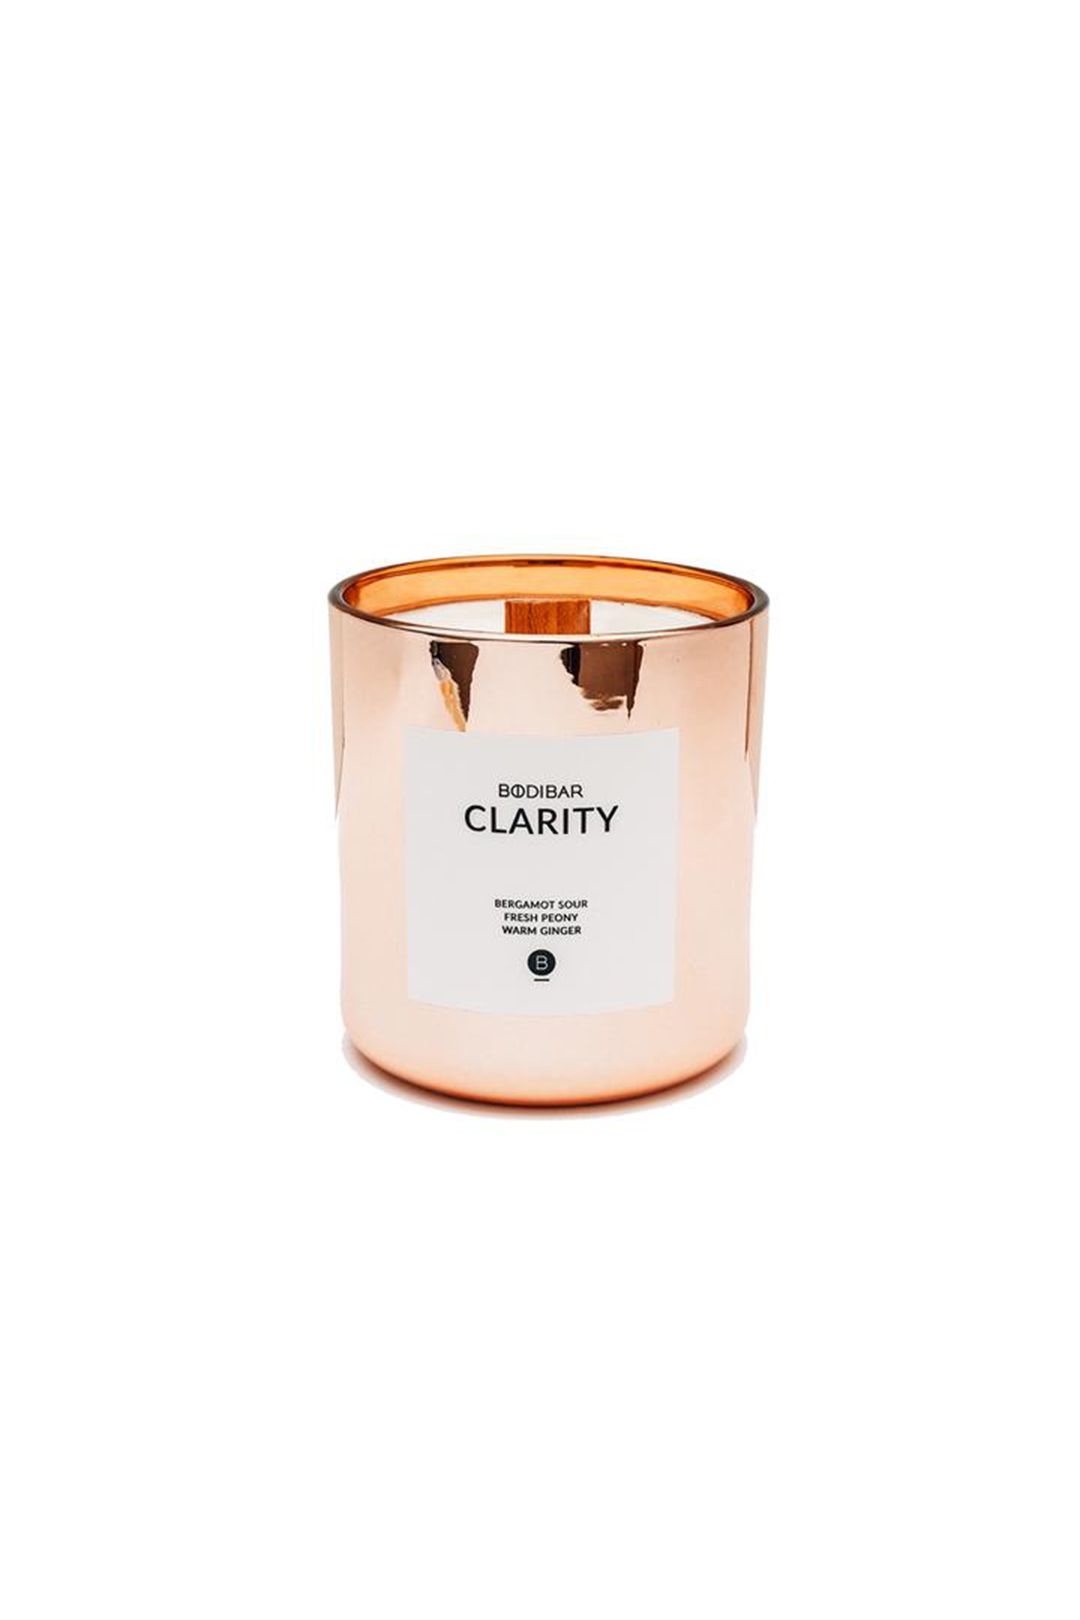 bodibar-clarity-rose-gold-luxe-candle